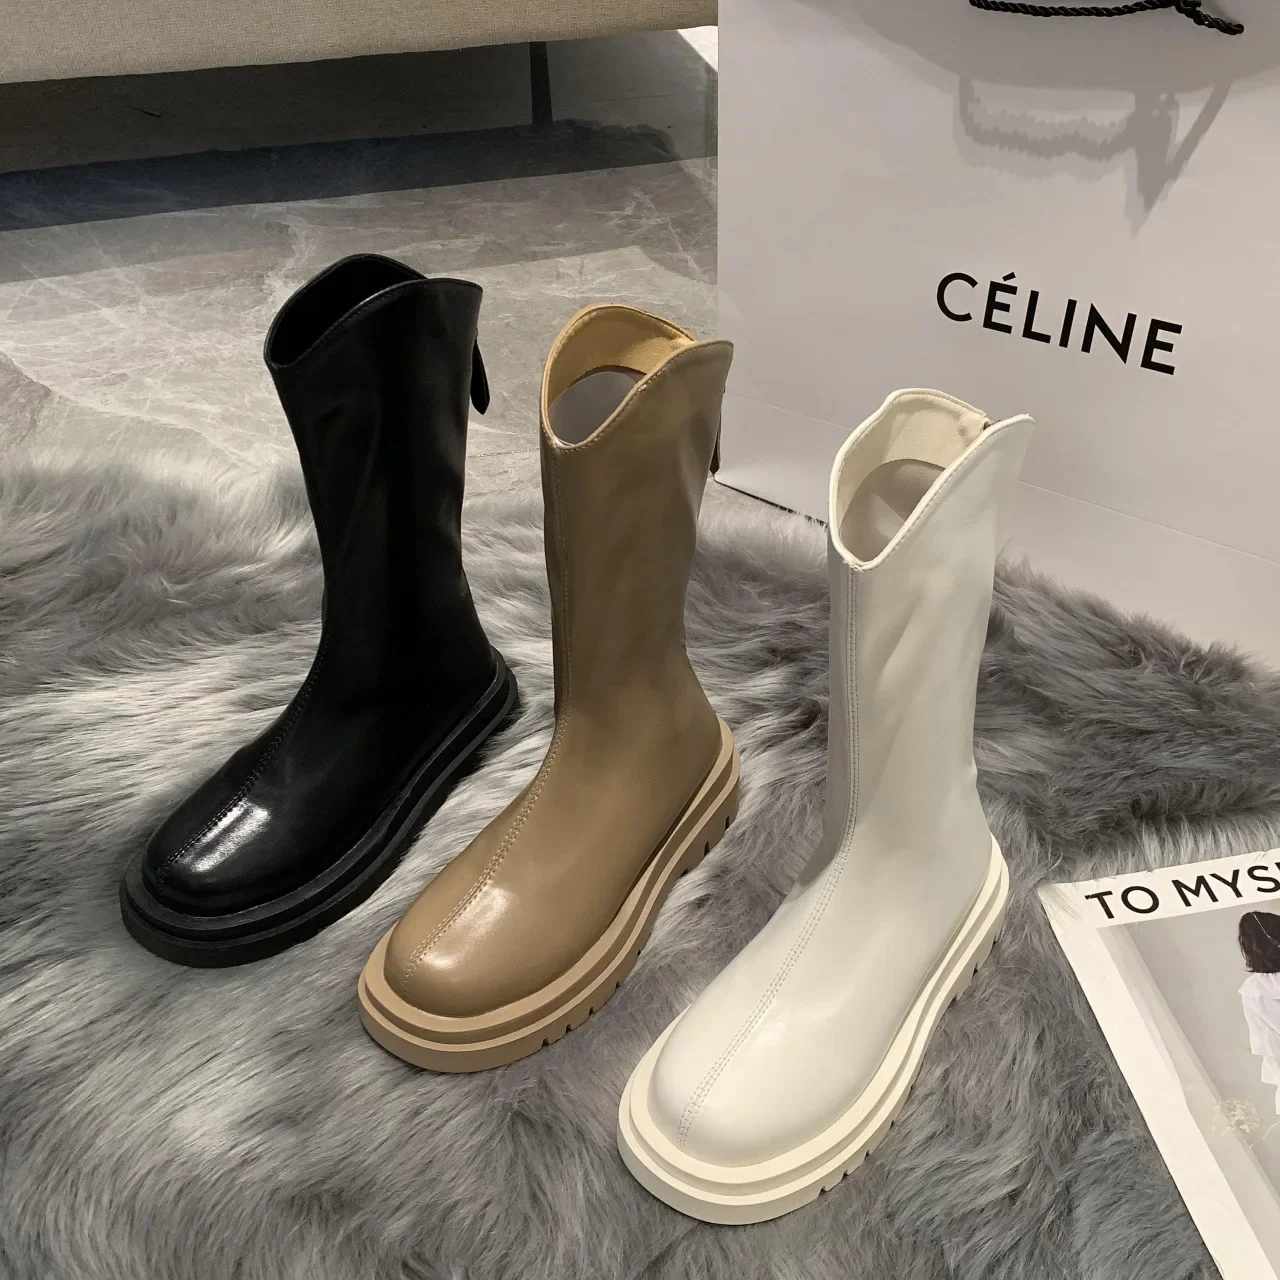 

2023 New Platform Boots for Women Round Toe Zipper Autumn Winter Fashion Female Mid-Calf Boots Botines De Mujer Chelsea Boots